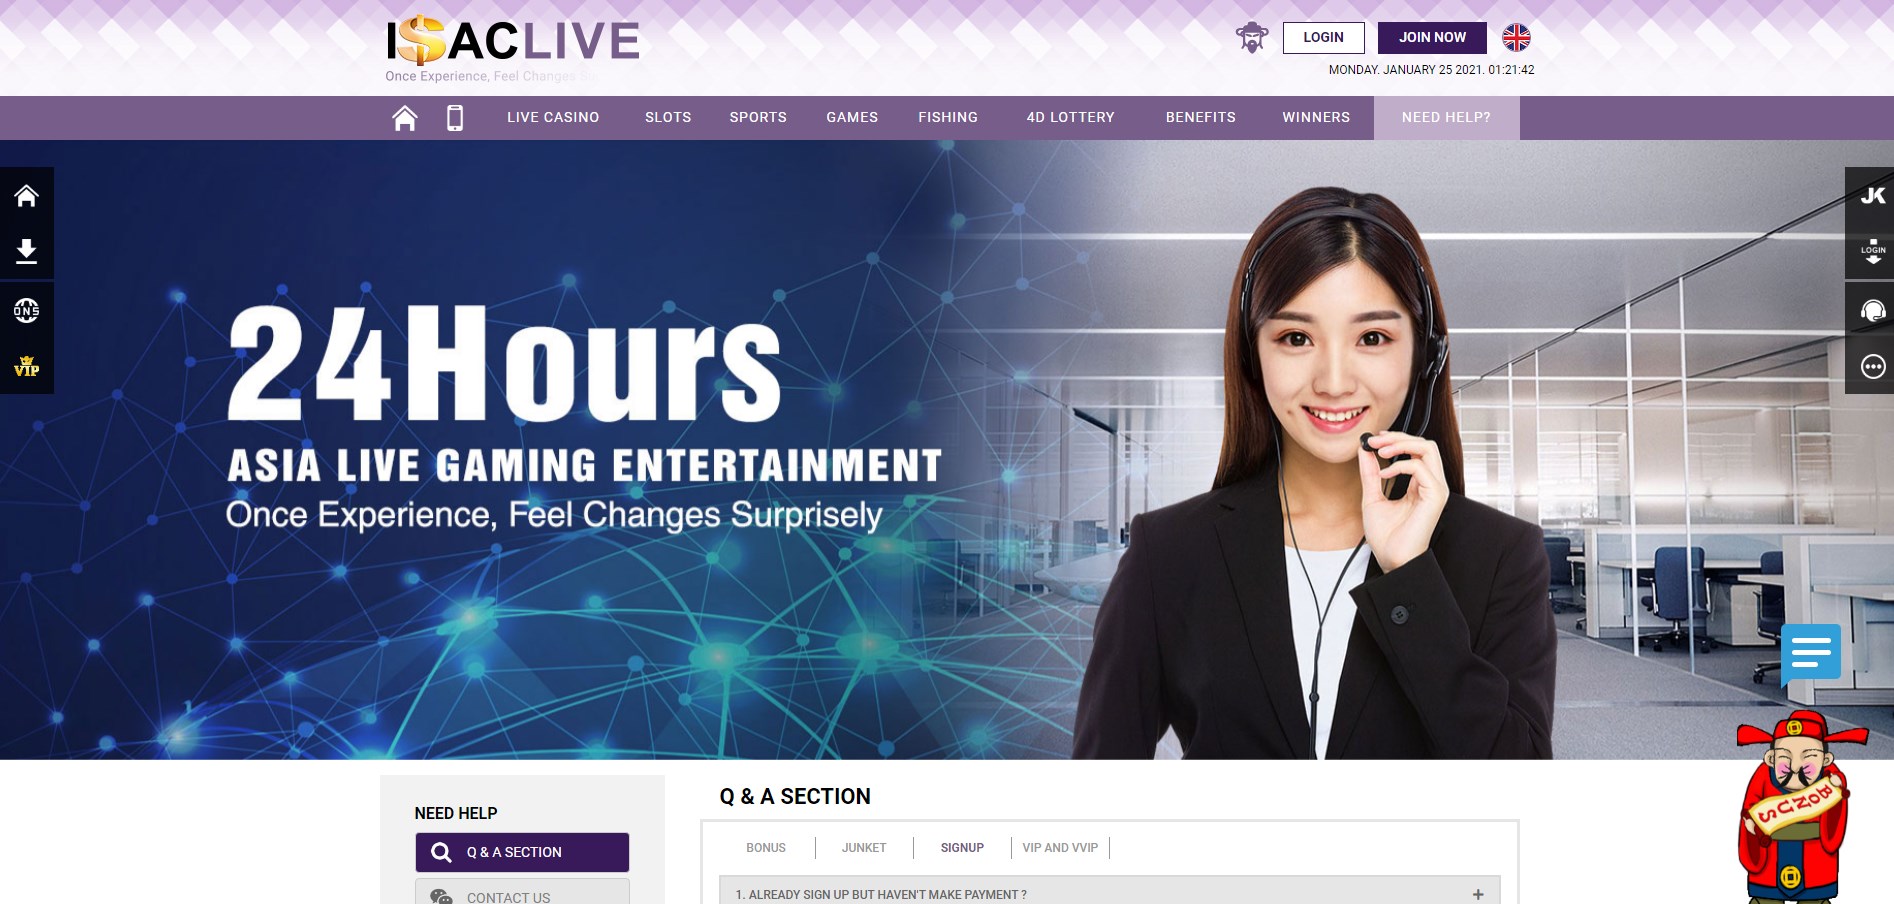 Isac Live Casino Support